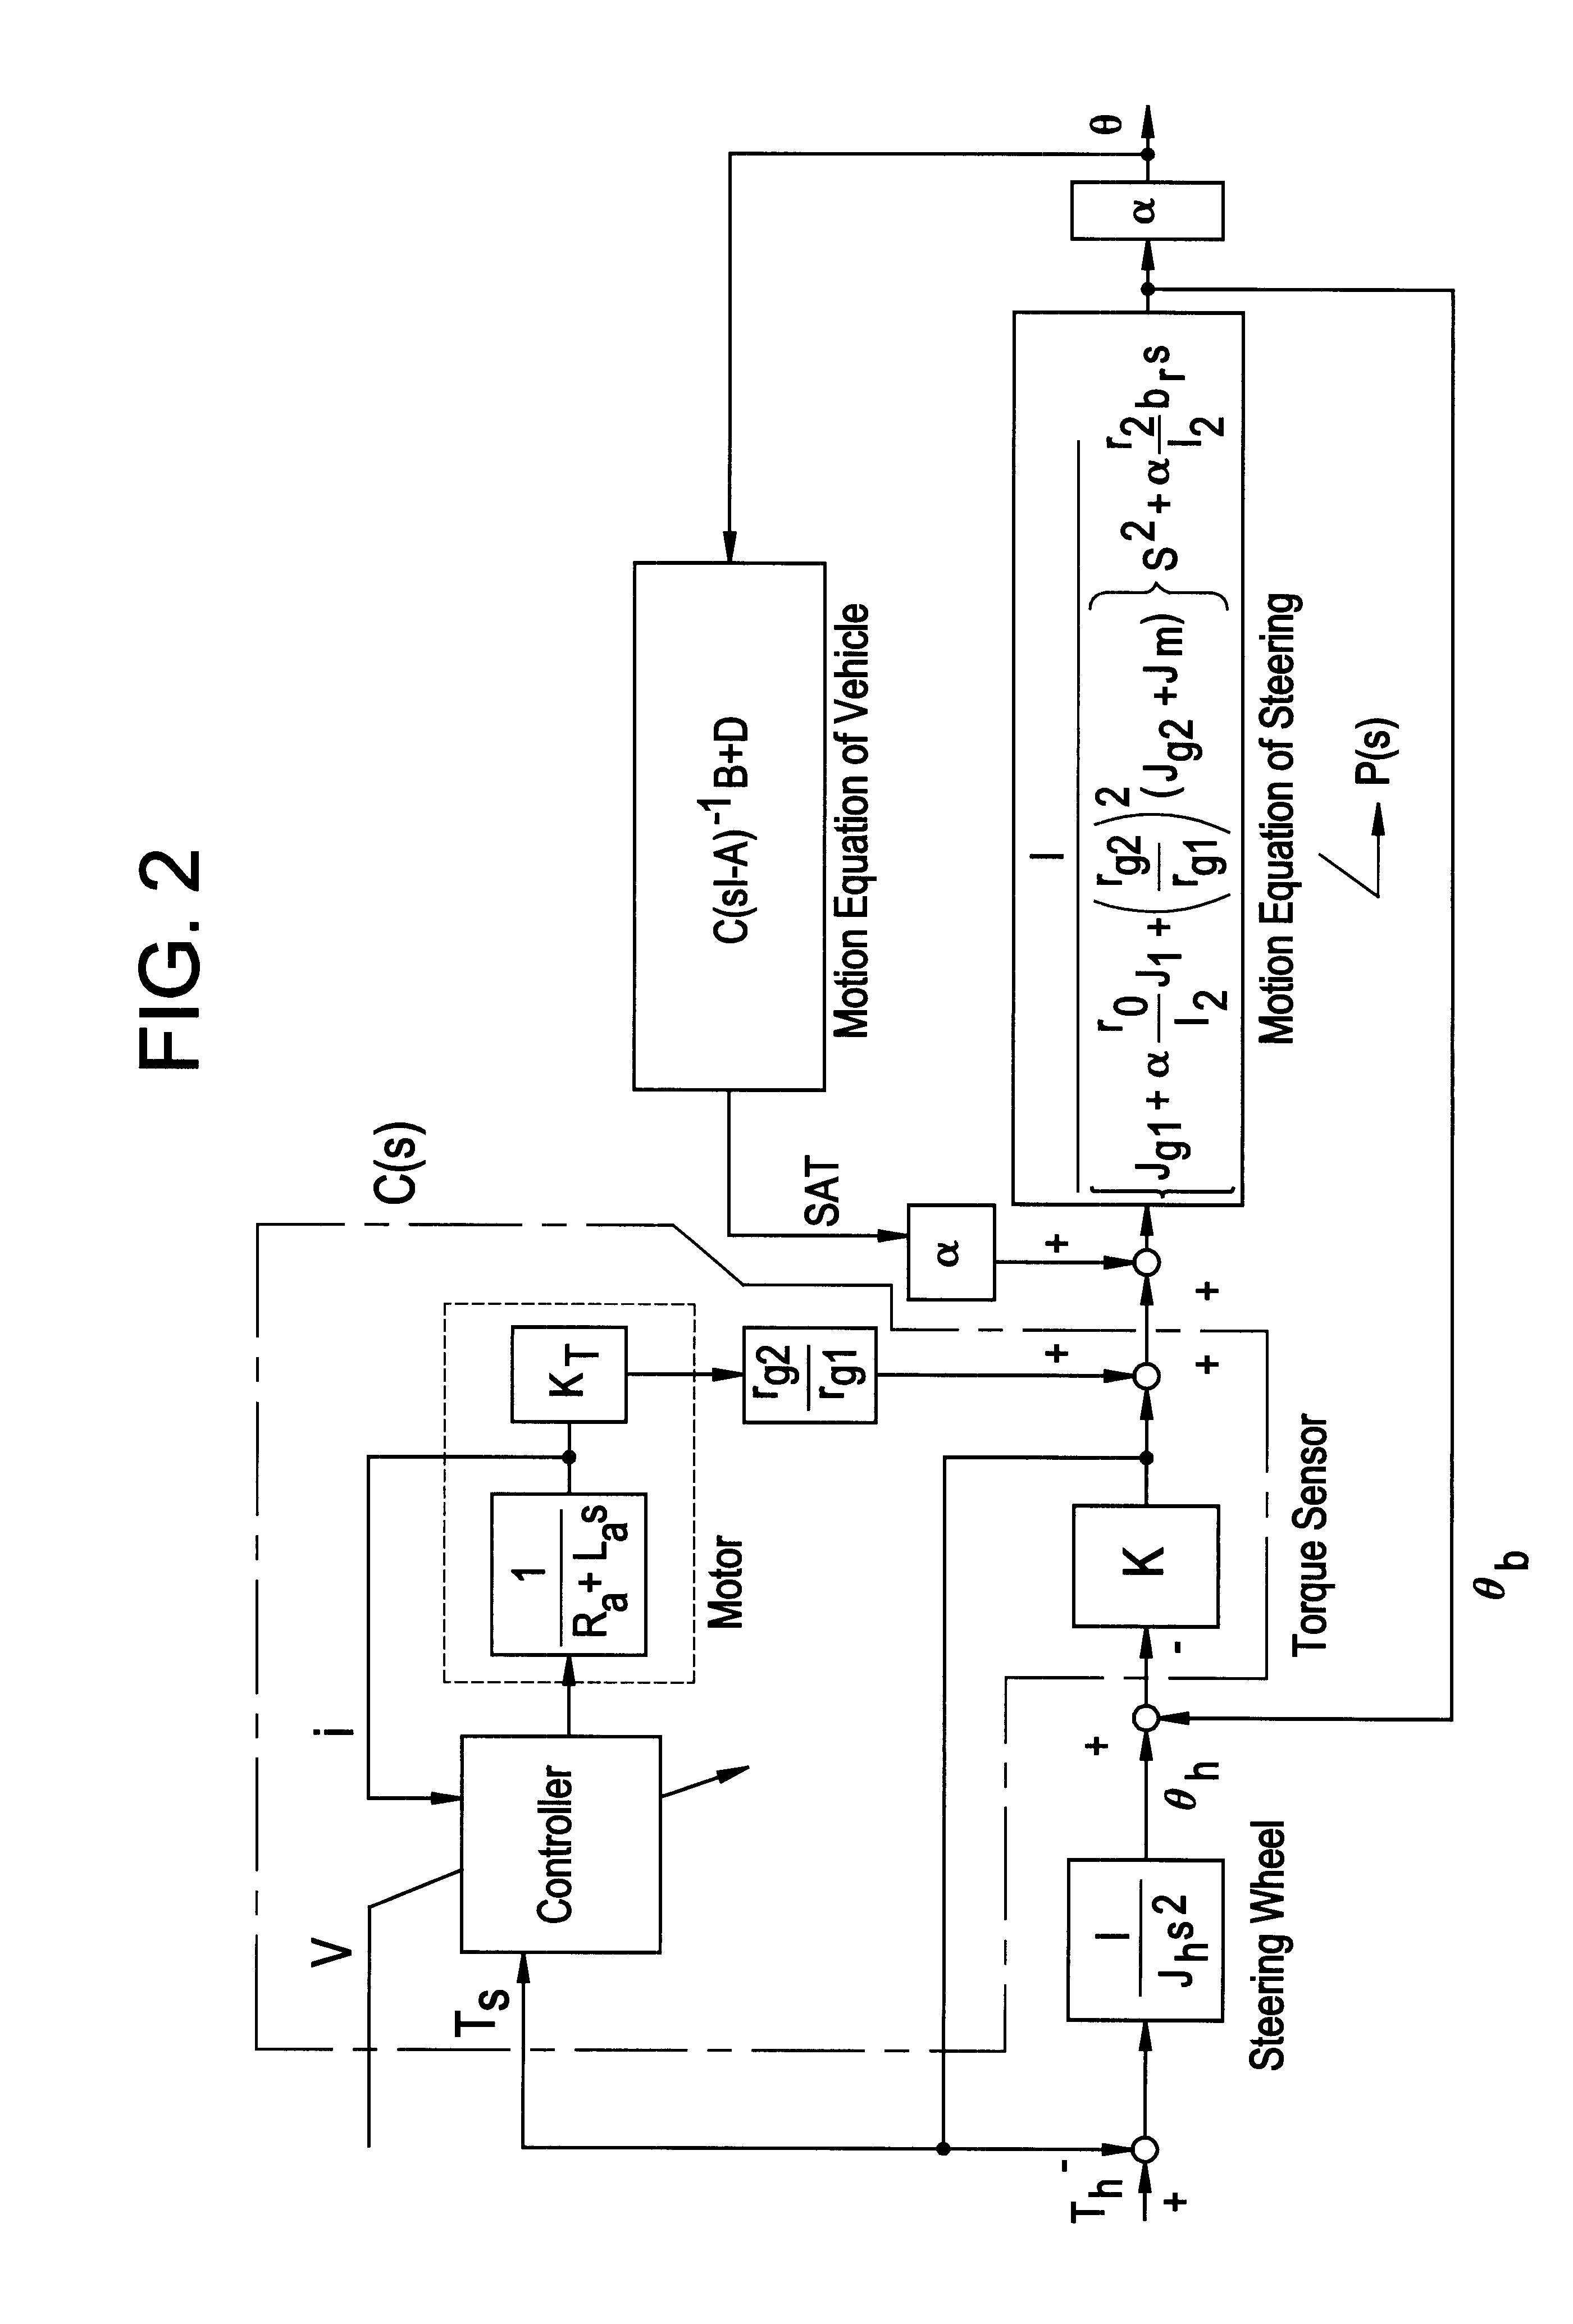 Control device for electric power steering apparatus